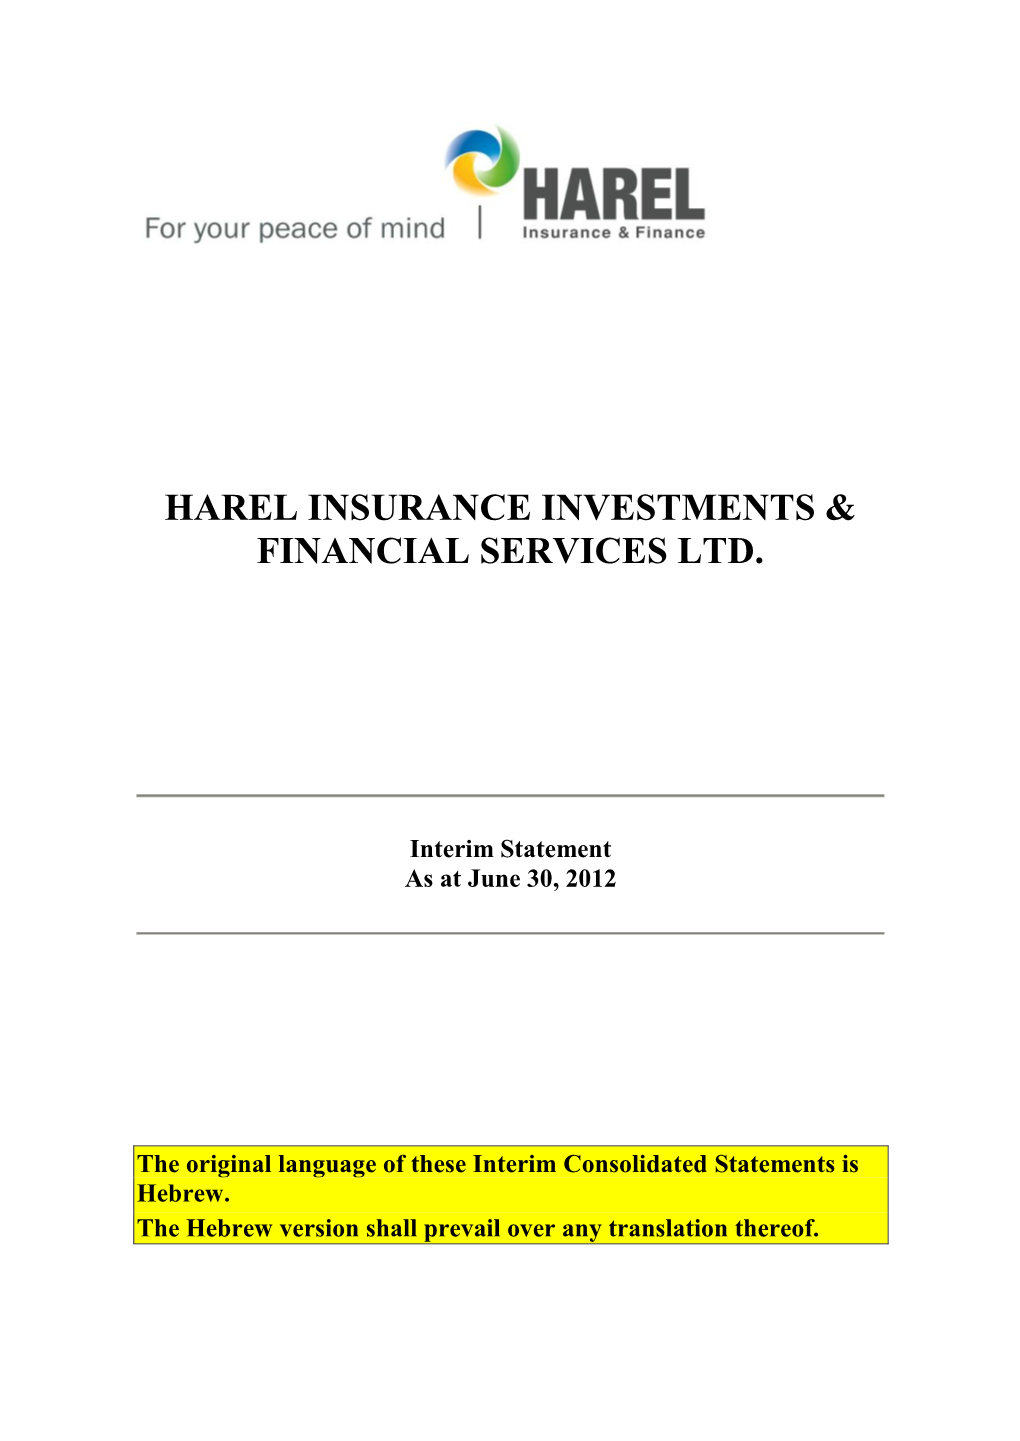 Harel Insurance Investments and Financial Services Ltd